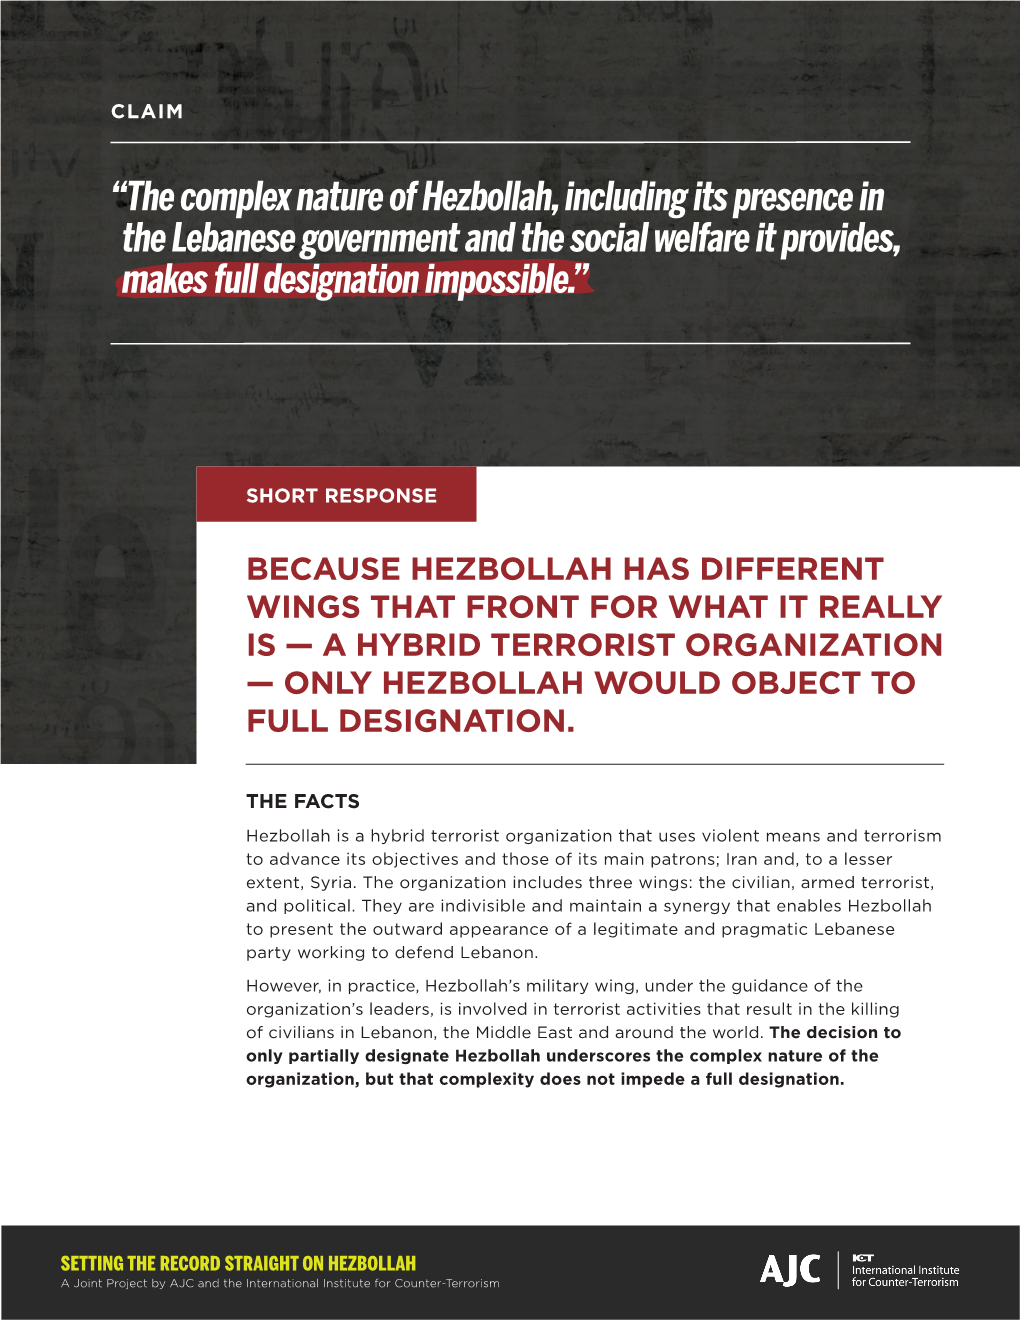 The Complex Nature of Hezbollah, Including Its Presence in the Lebanese Government and the Social Welfare It Provides, Makes Full Designation Impossible.”